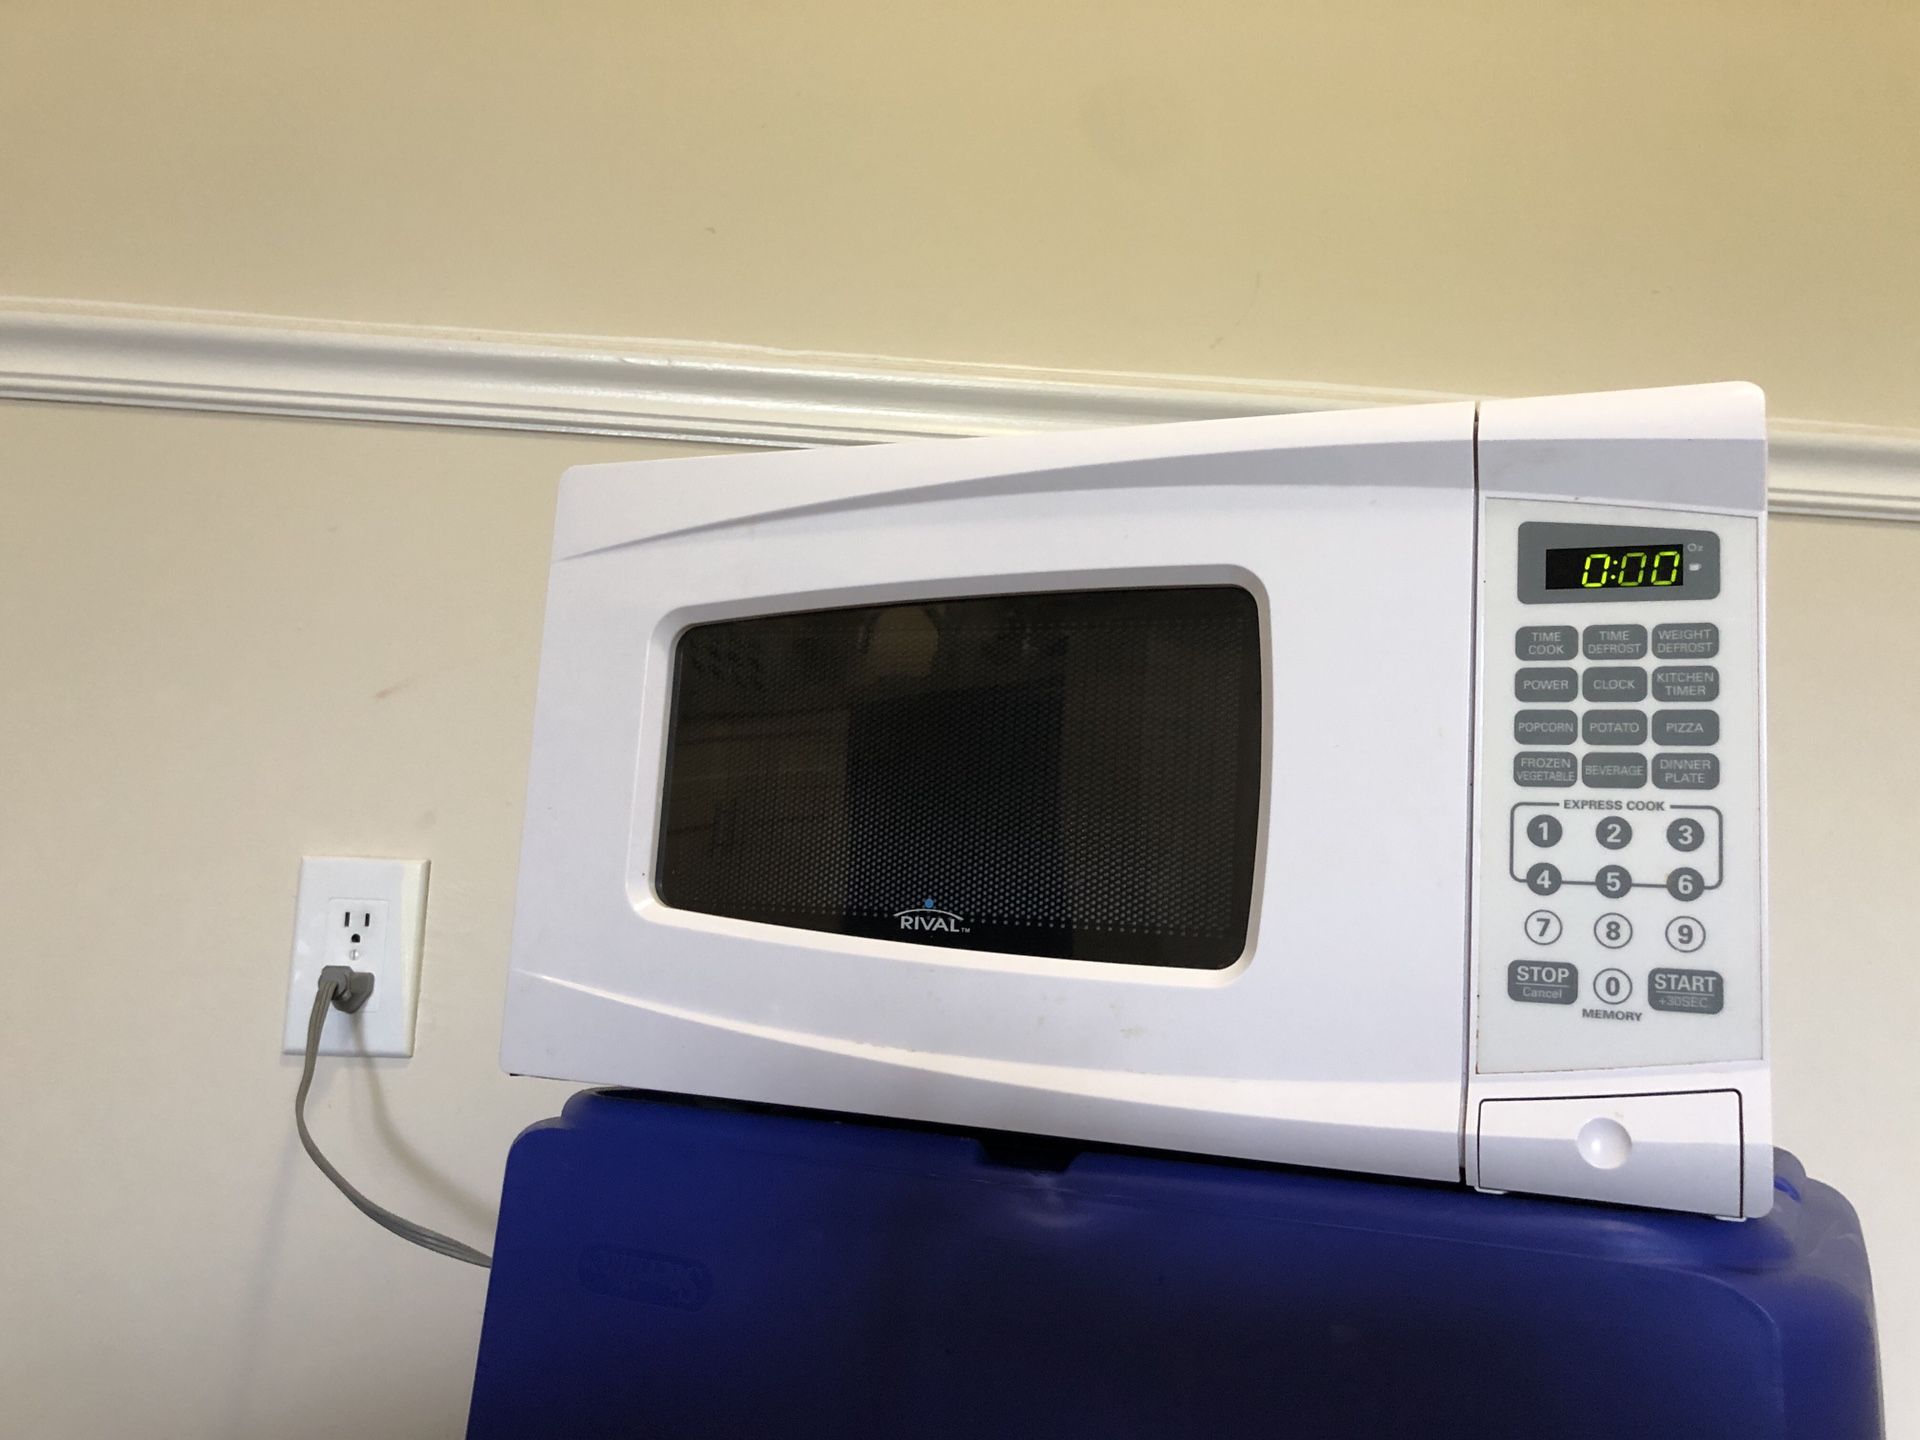 FIRE SALE small microwave oven